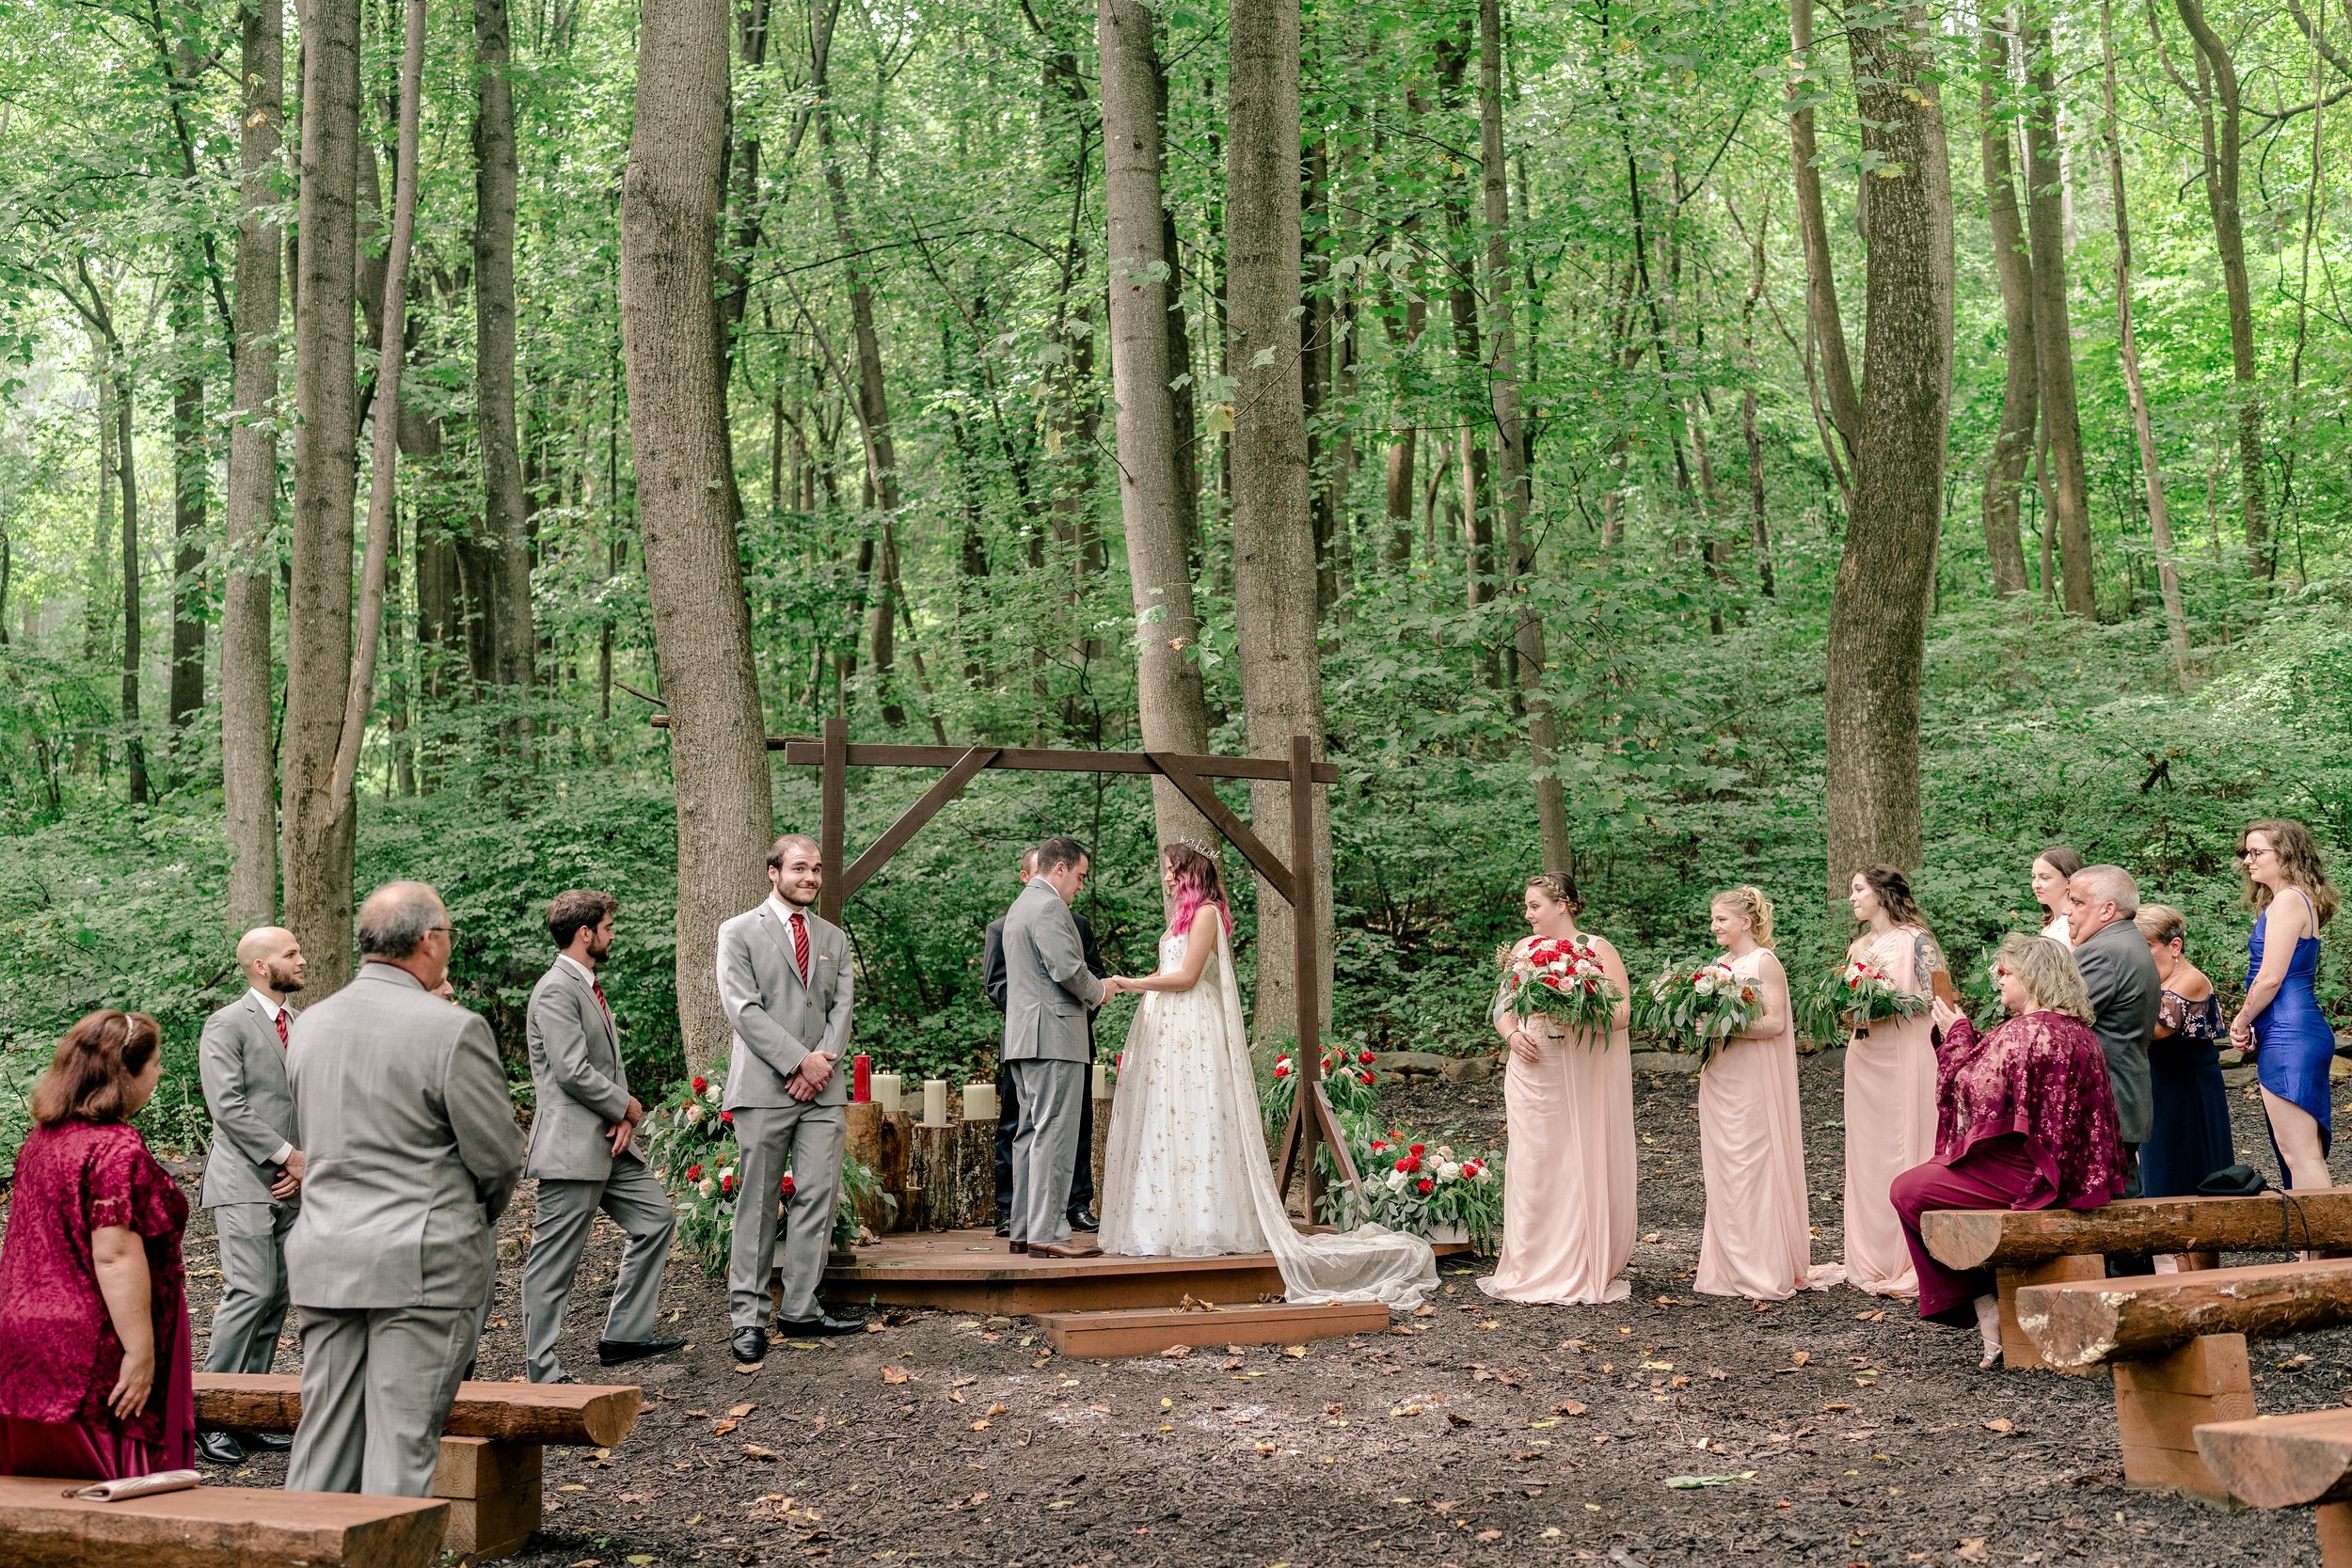 A woodland wedding ceremony at one of the best wedding venues in Northern Virginia